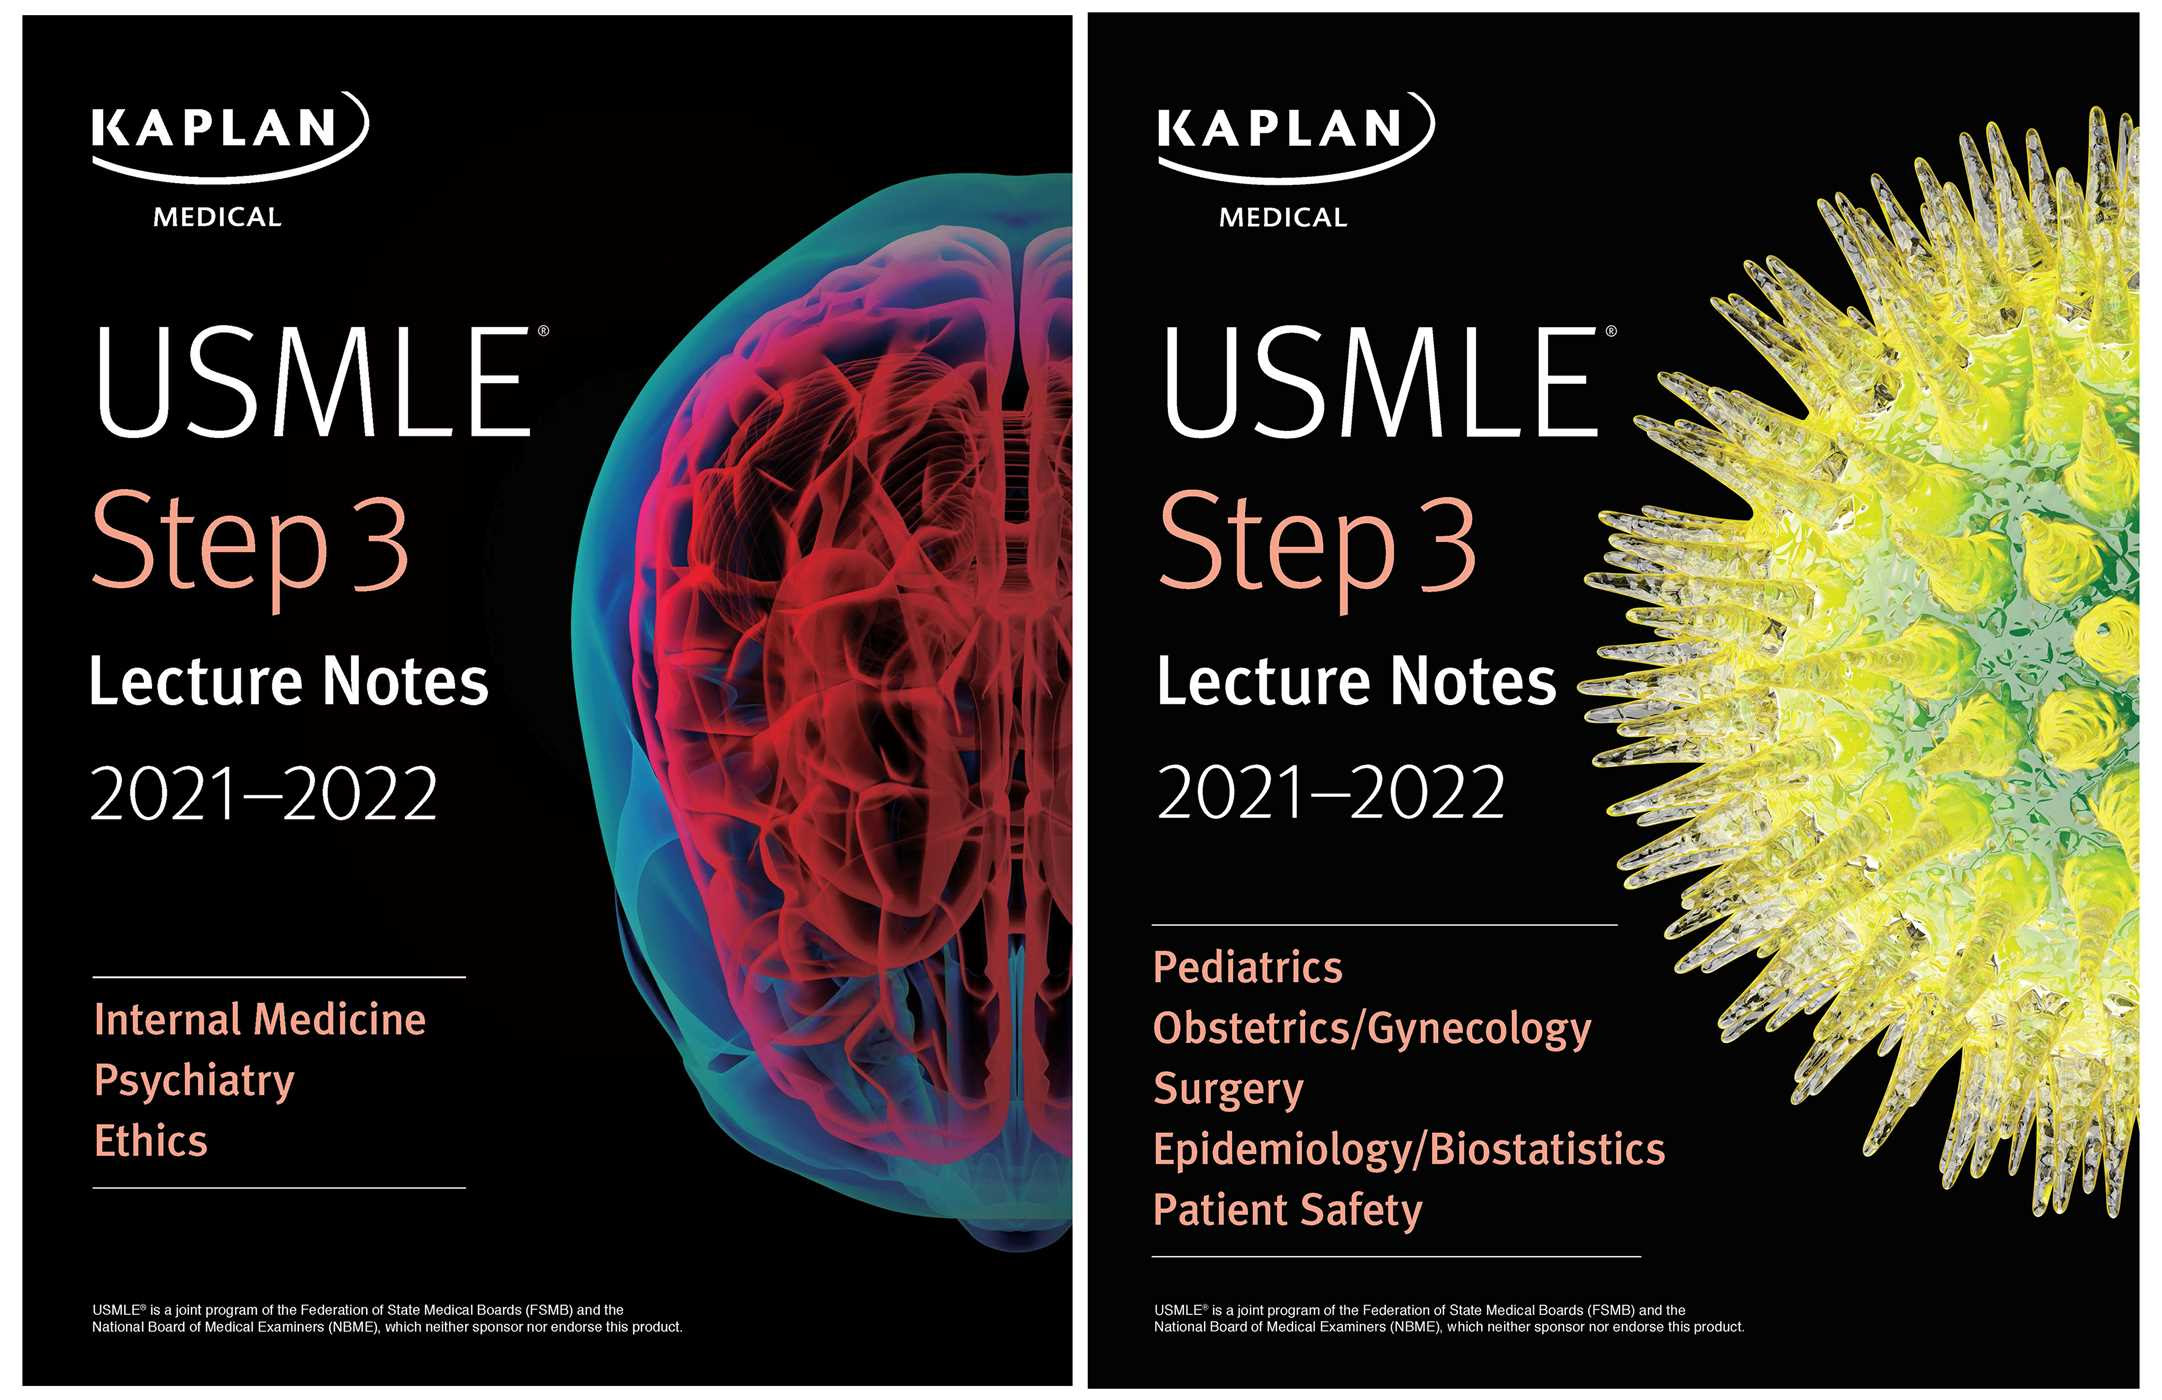 USMLE Step 3 Lecture Notes 2021-2022 PDF